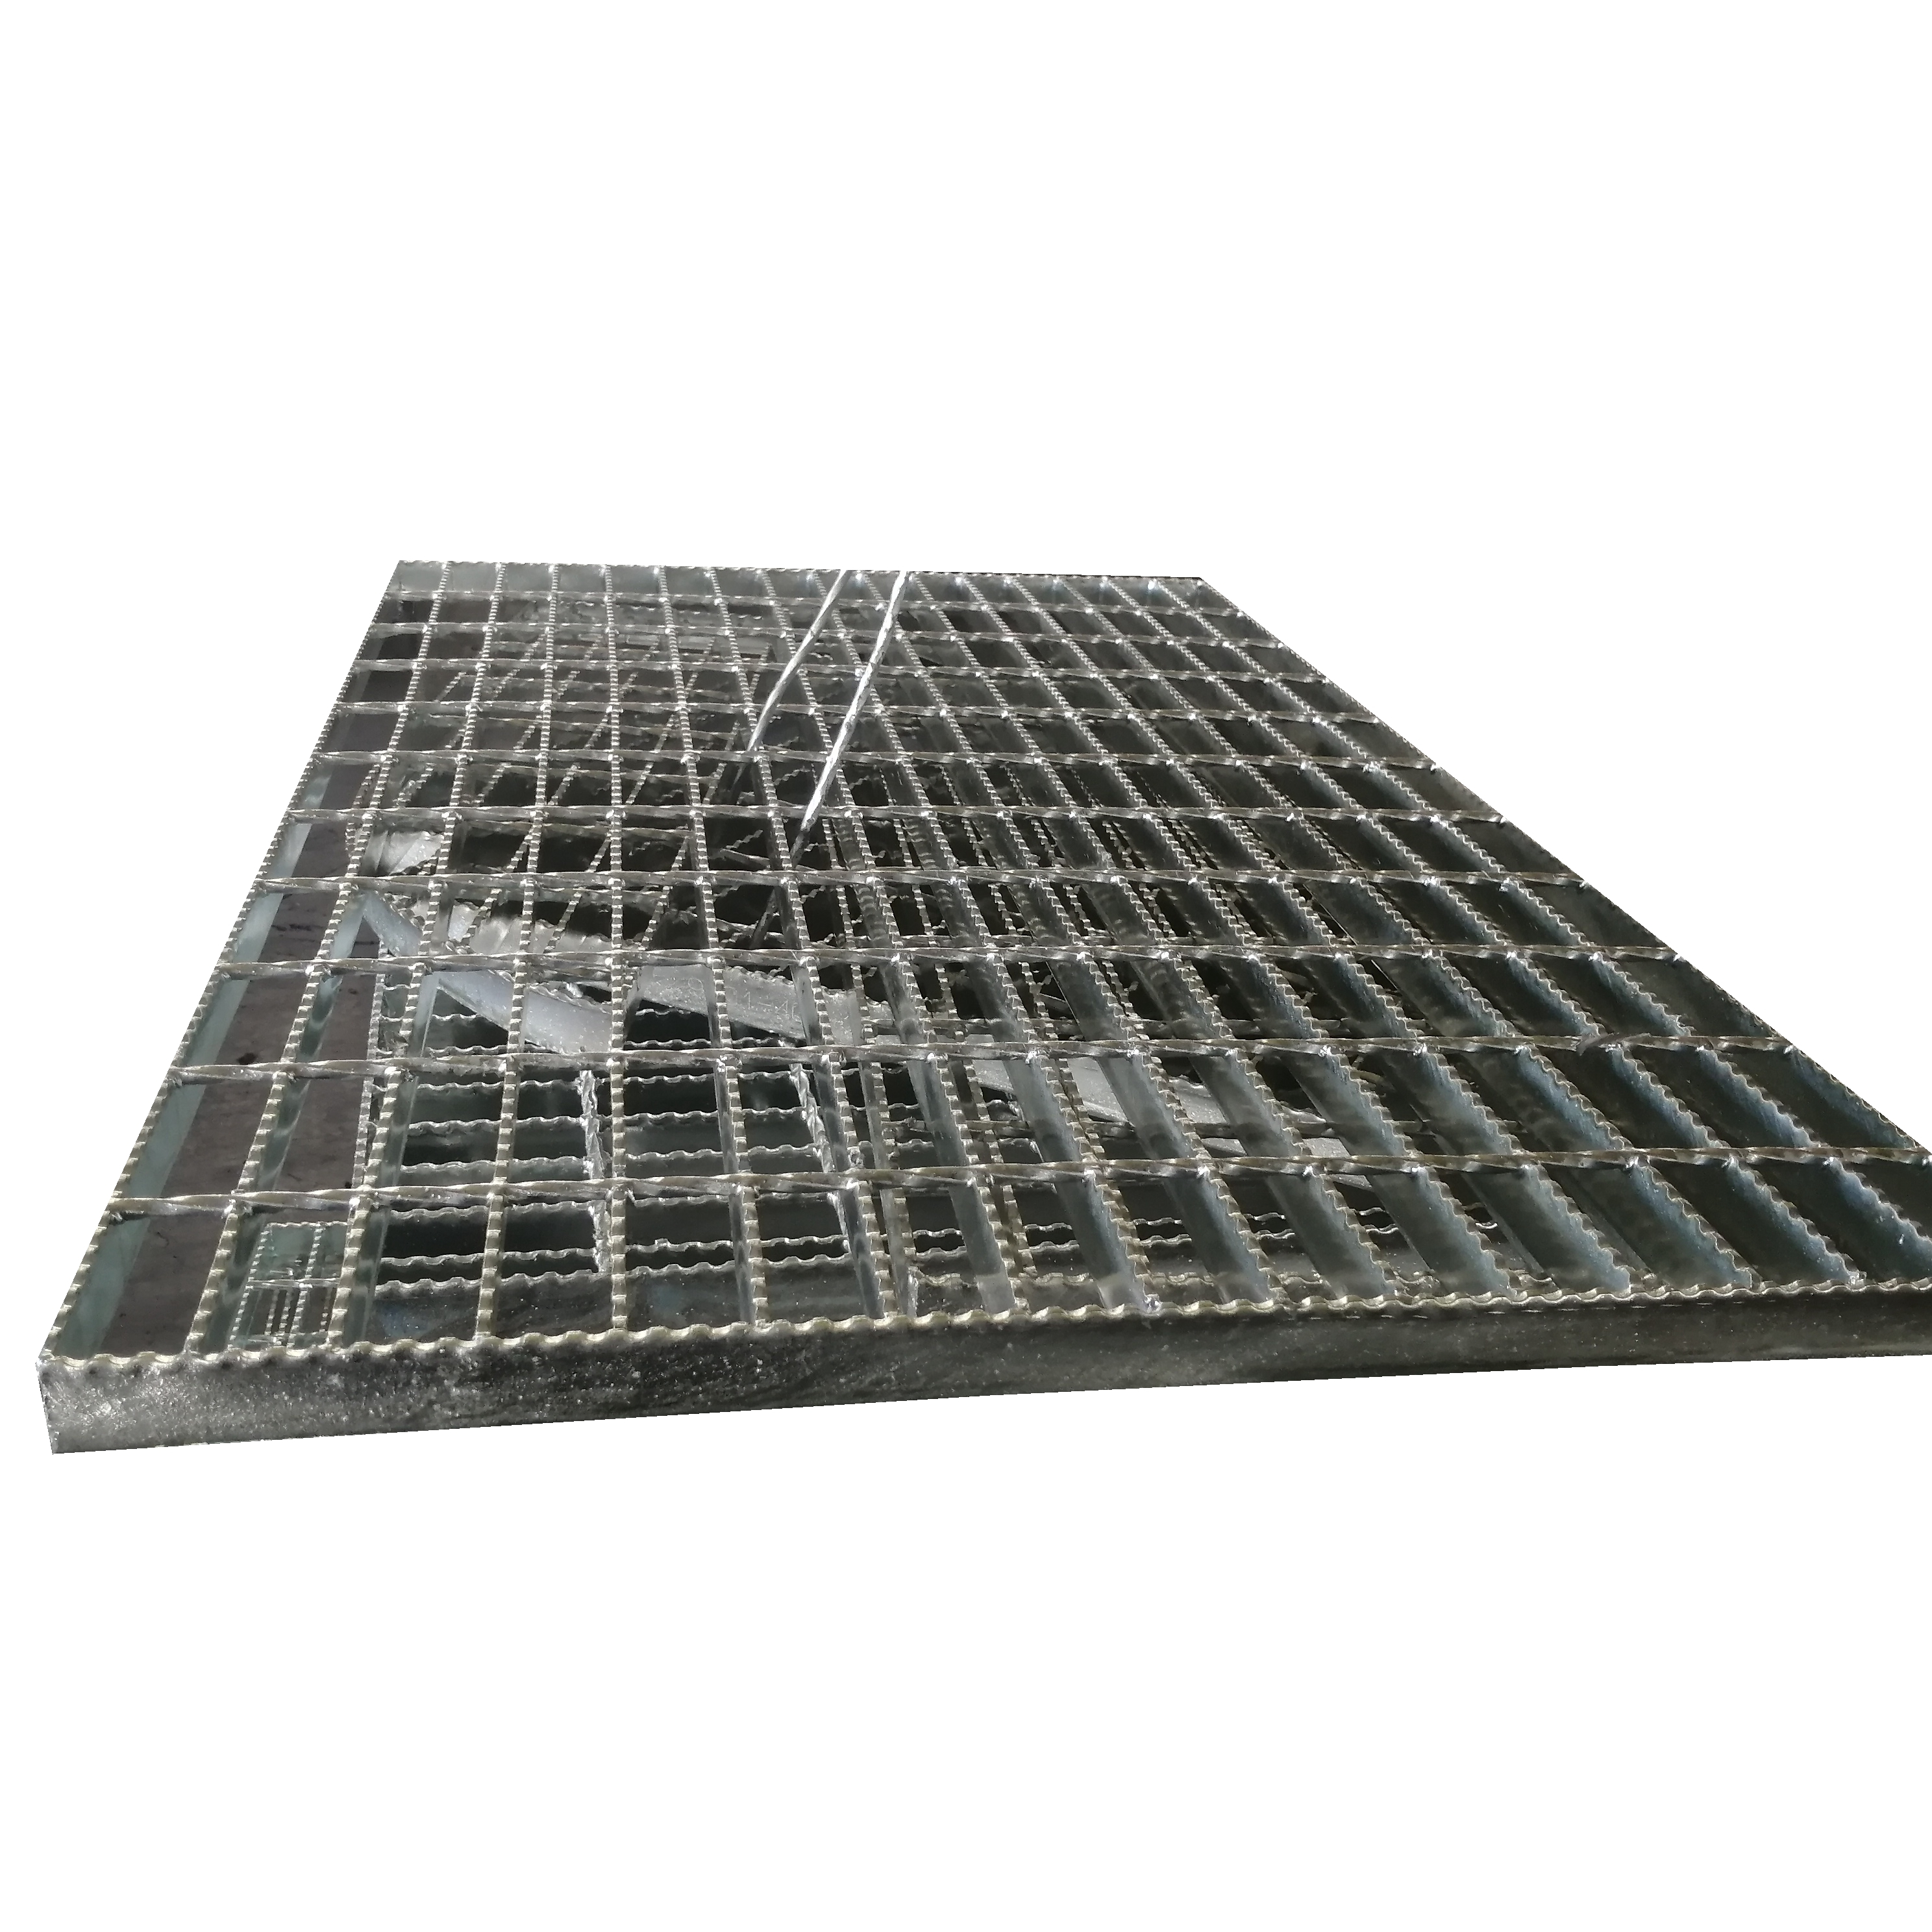 teench drain steel grating with high quality New designed